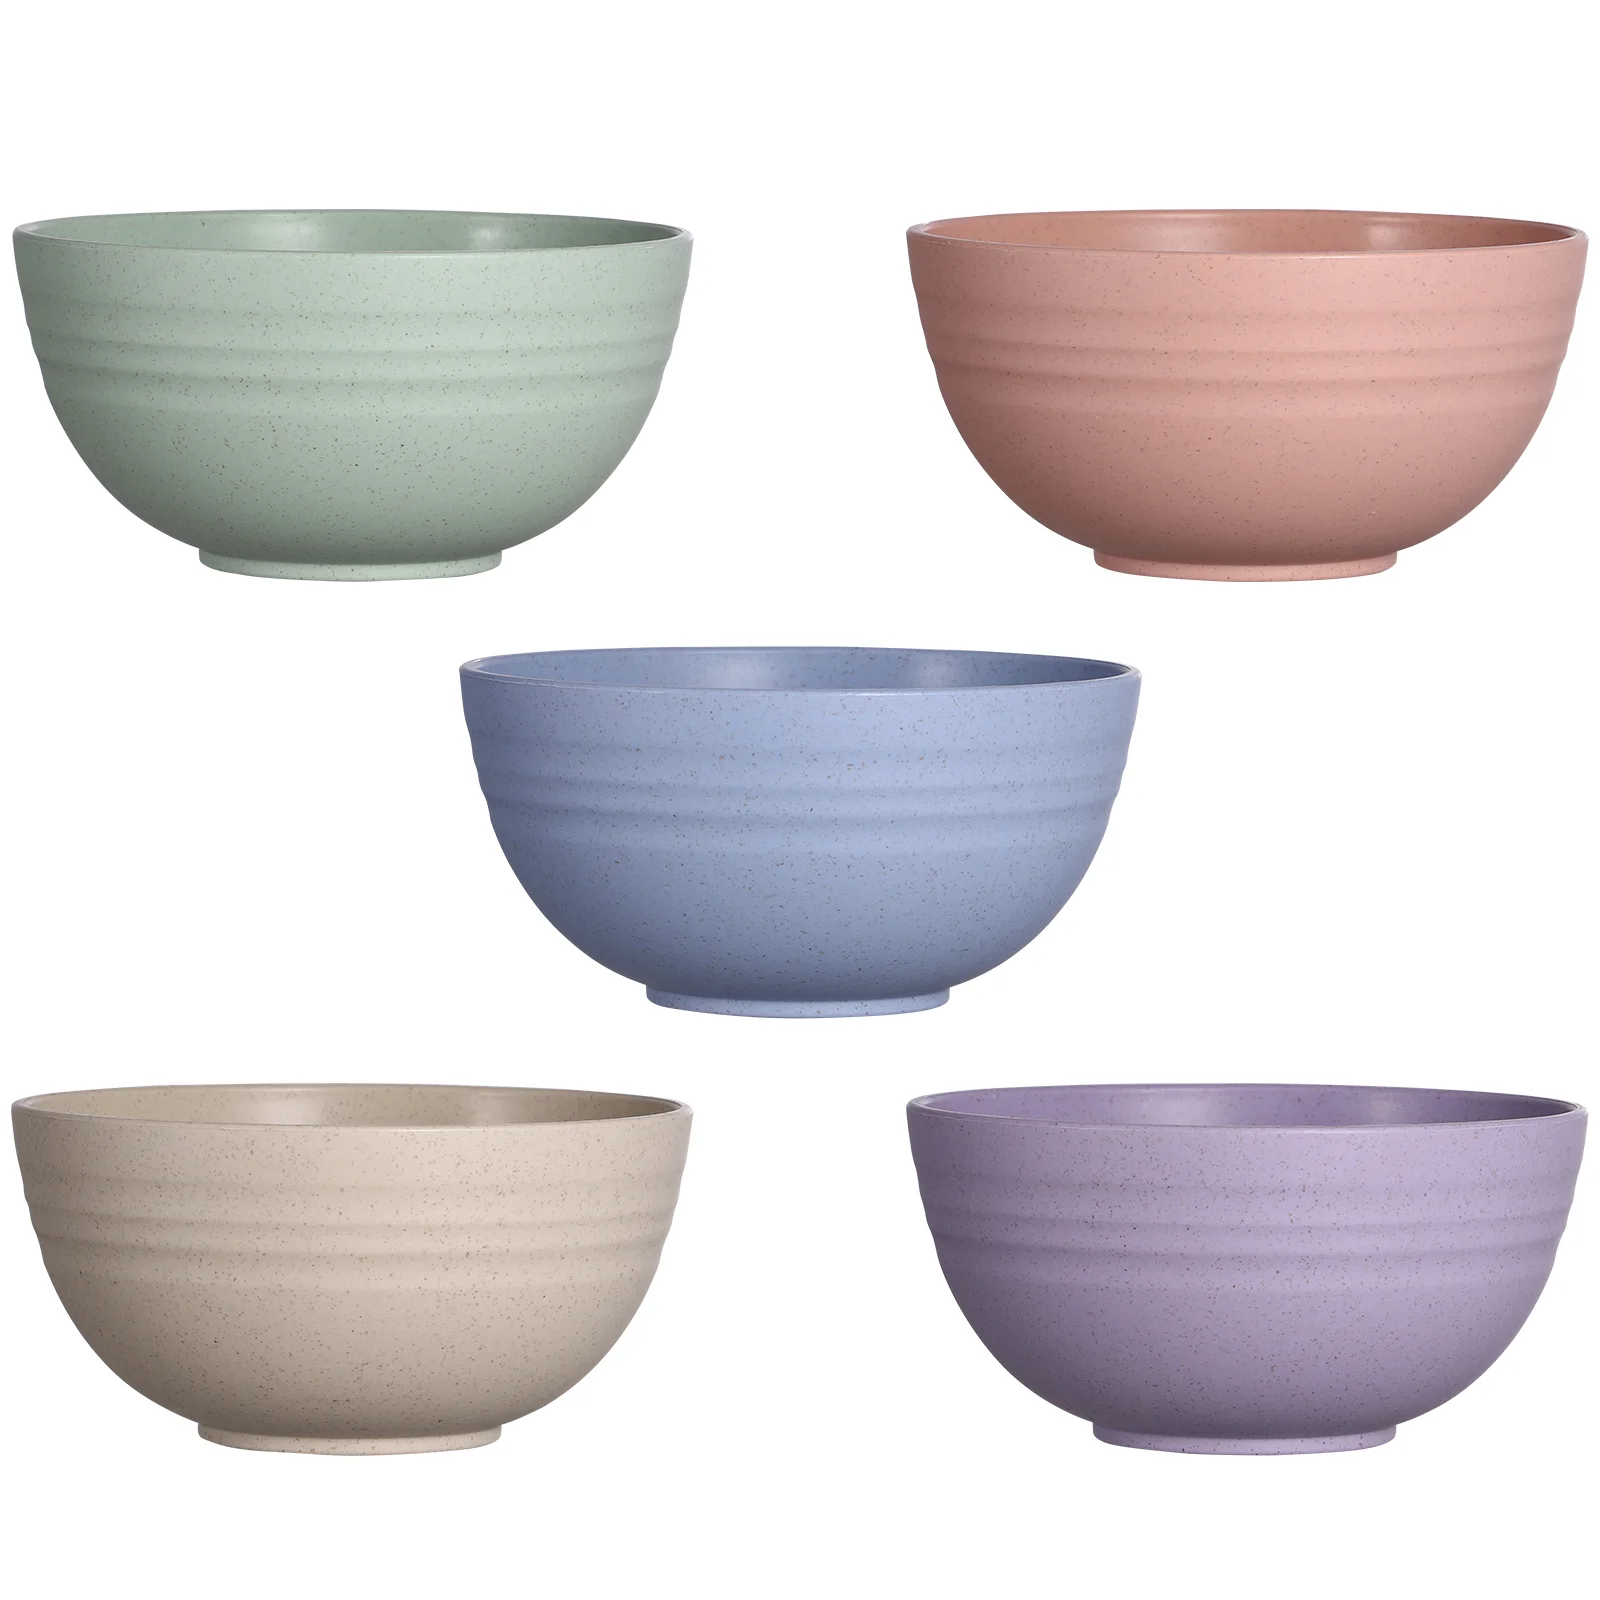 

5 bowls unbreakable cereal bowls wheat lightweight bowls for cereal, rice, noodle, soup, kitchen salad bowl